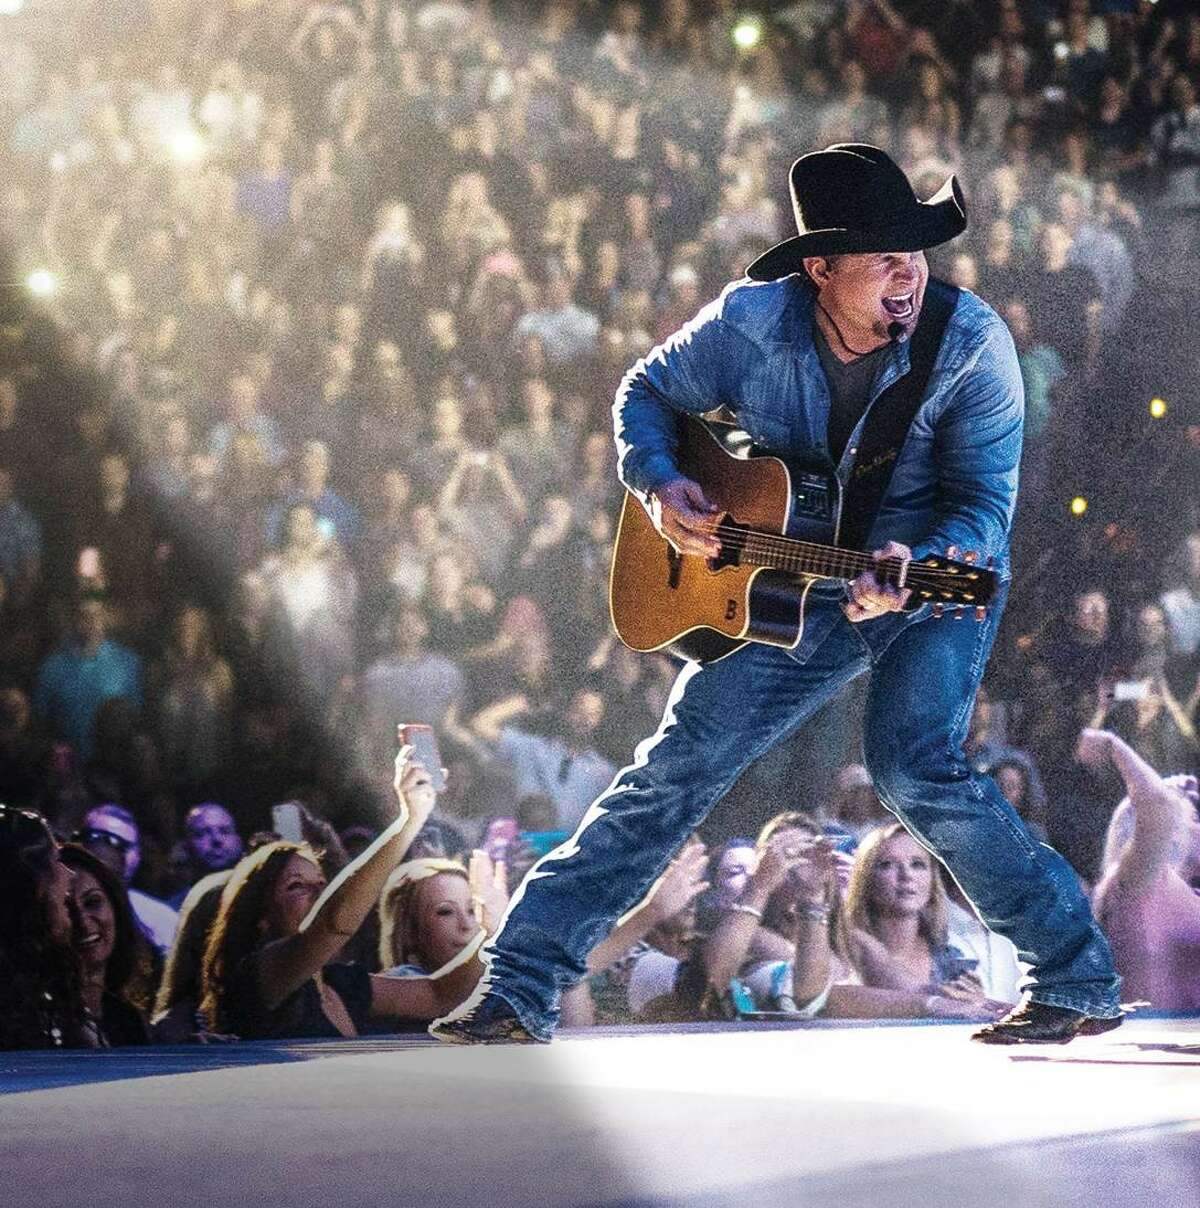 The Houston Livestock Show and Rodeo announced today that Garth Brooks will open and close the 2018 Rodeo.